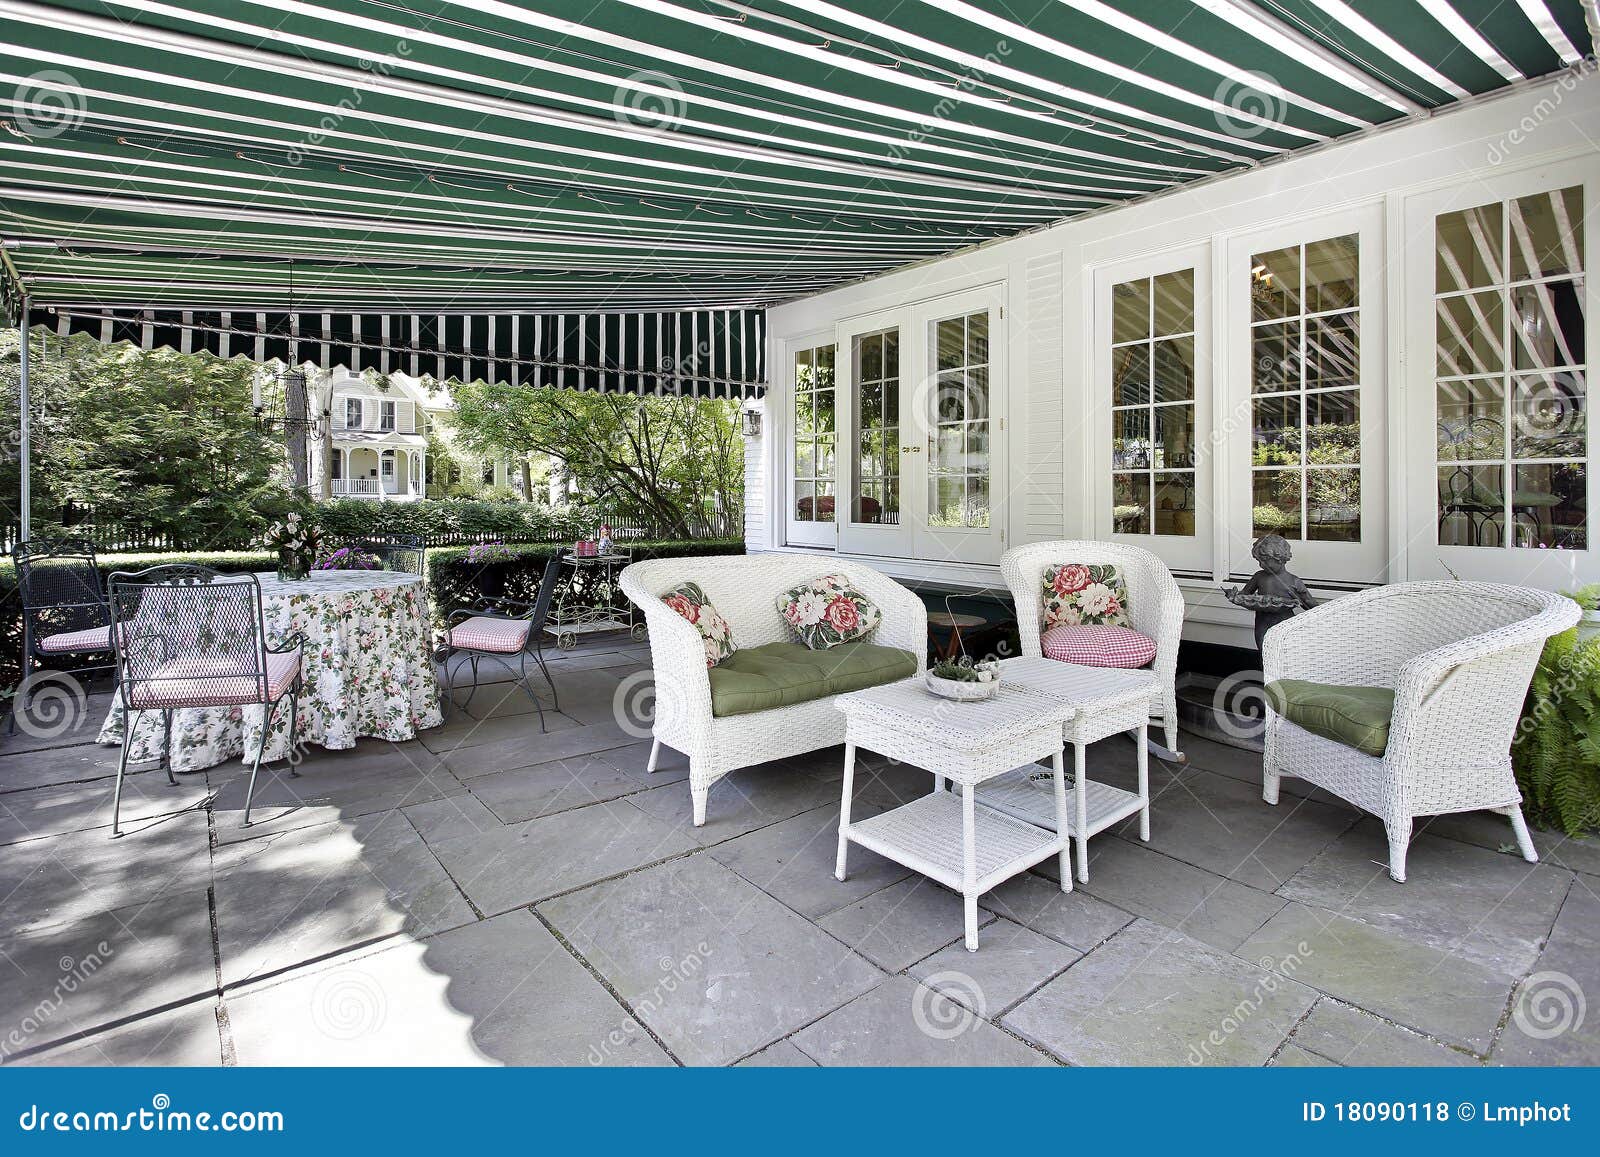 patio with green awning